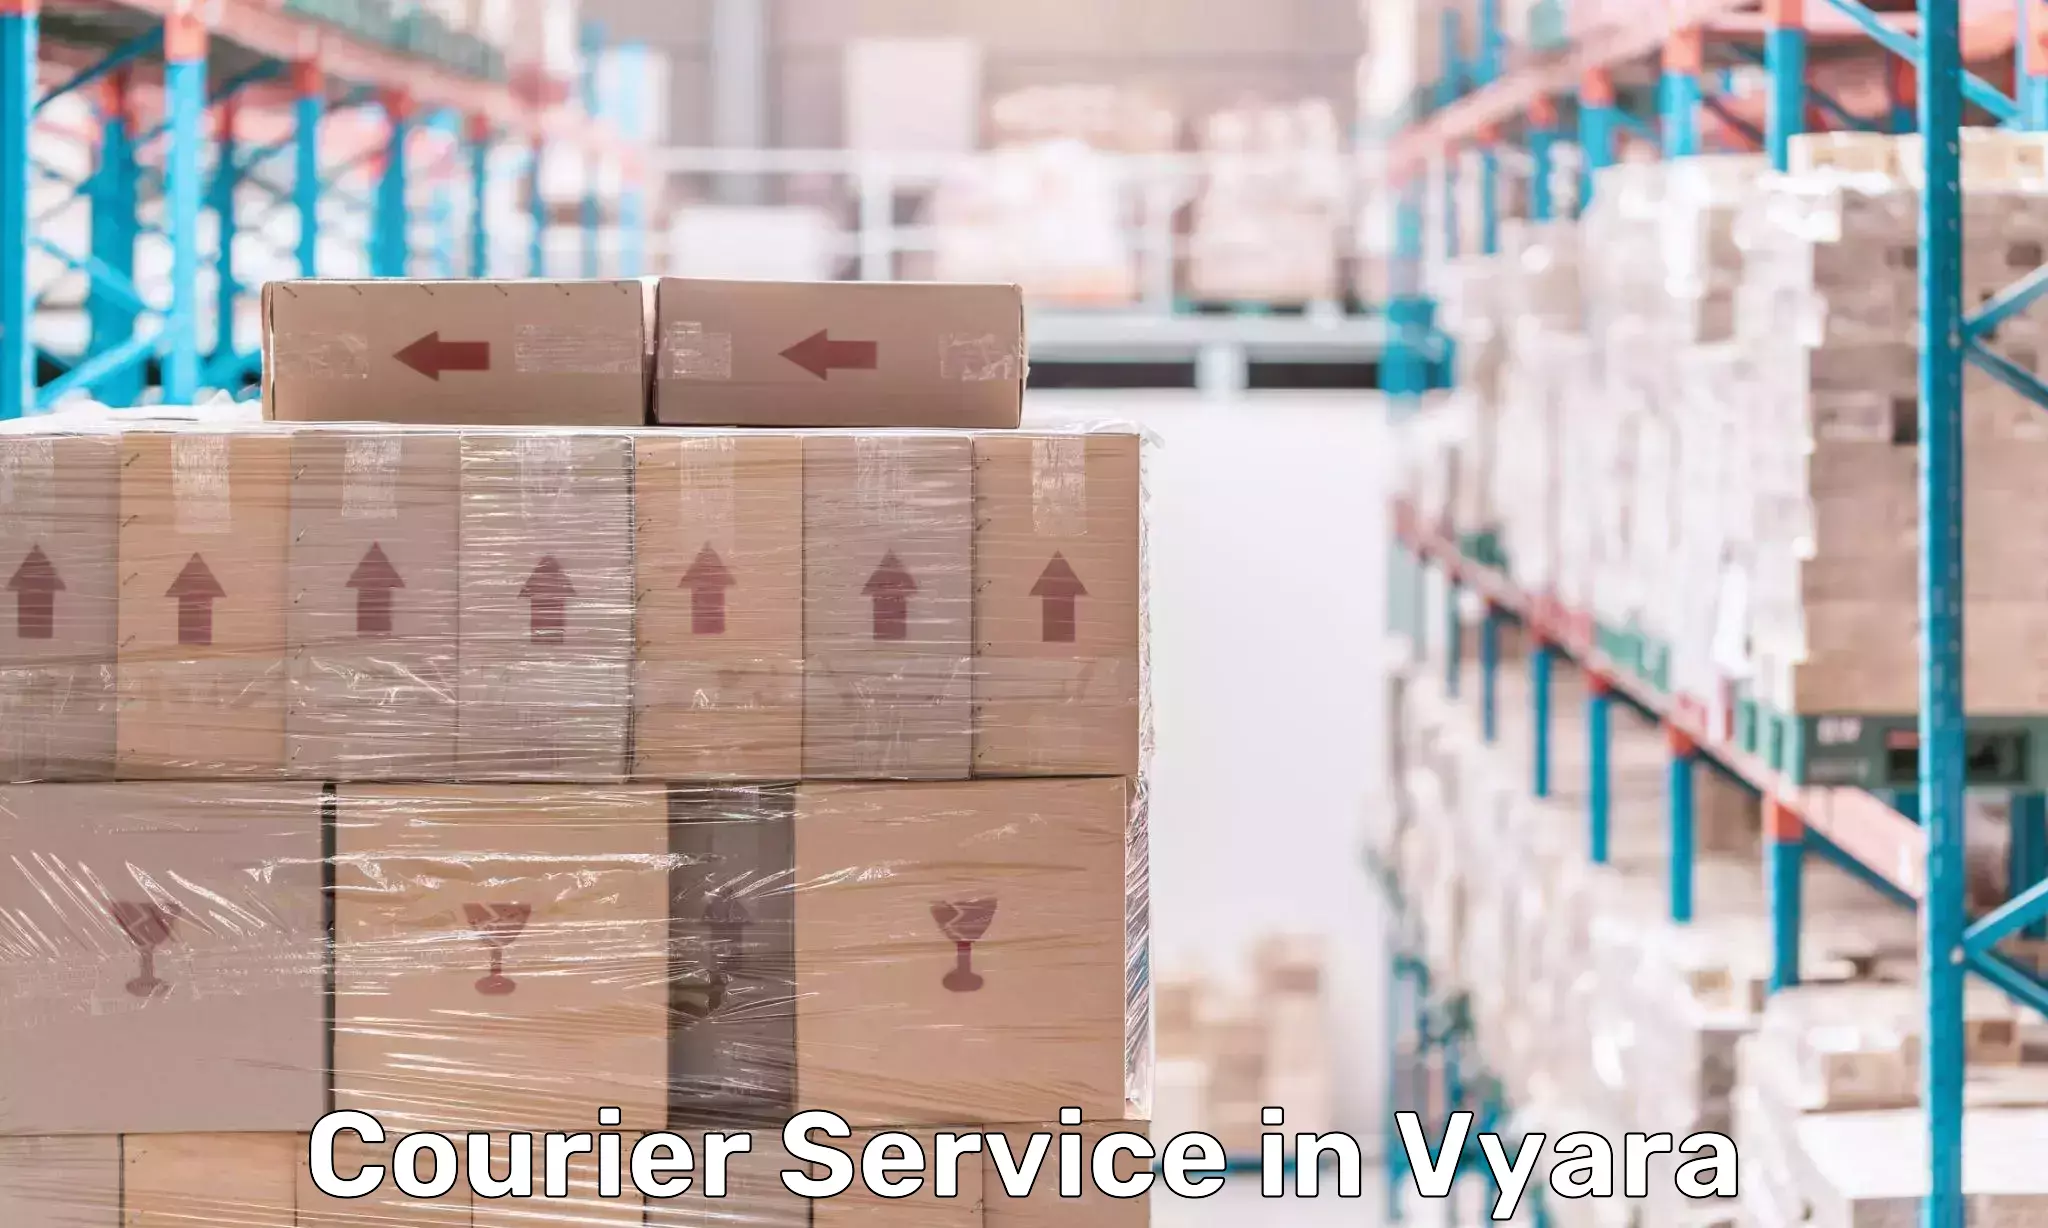 Courier services in Vyara